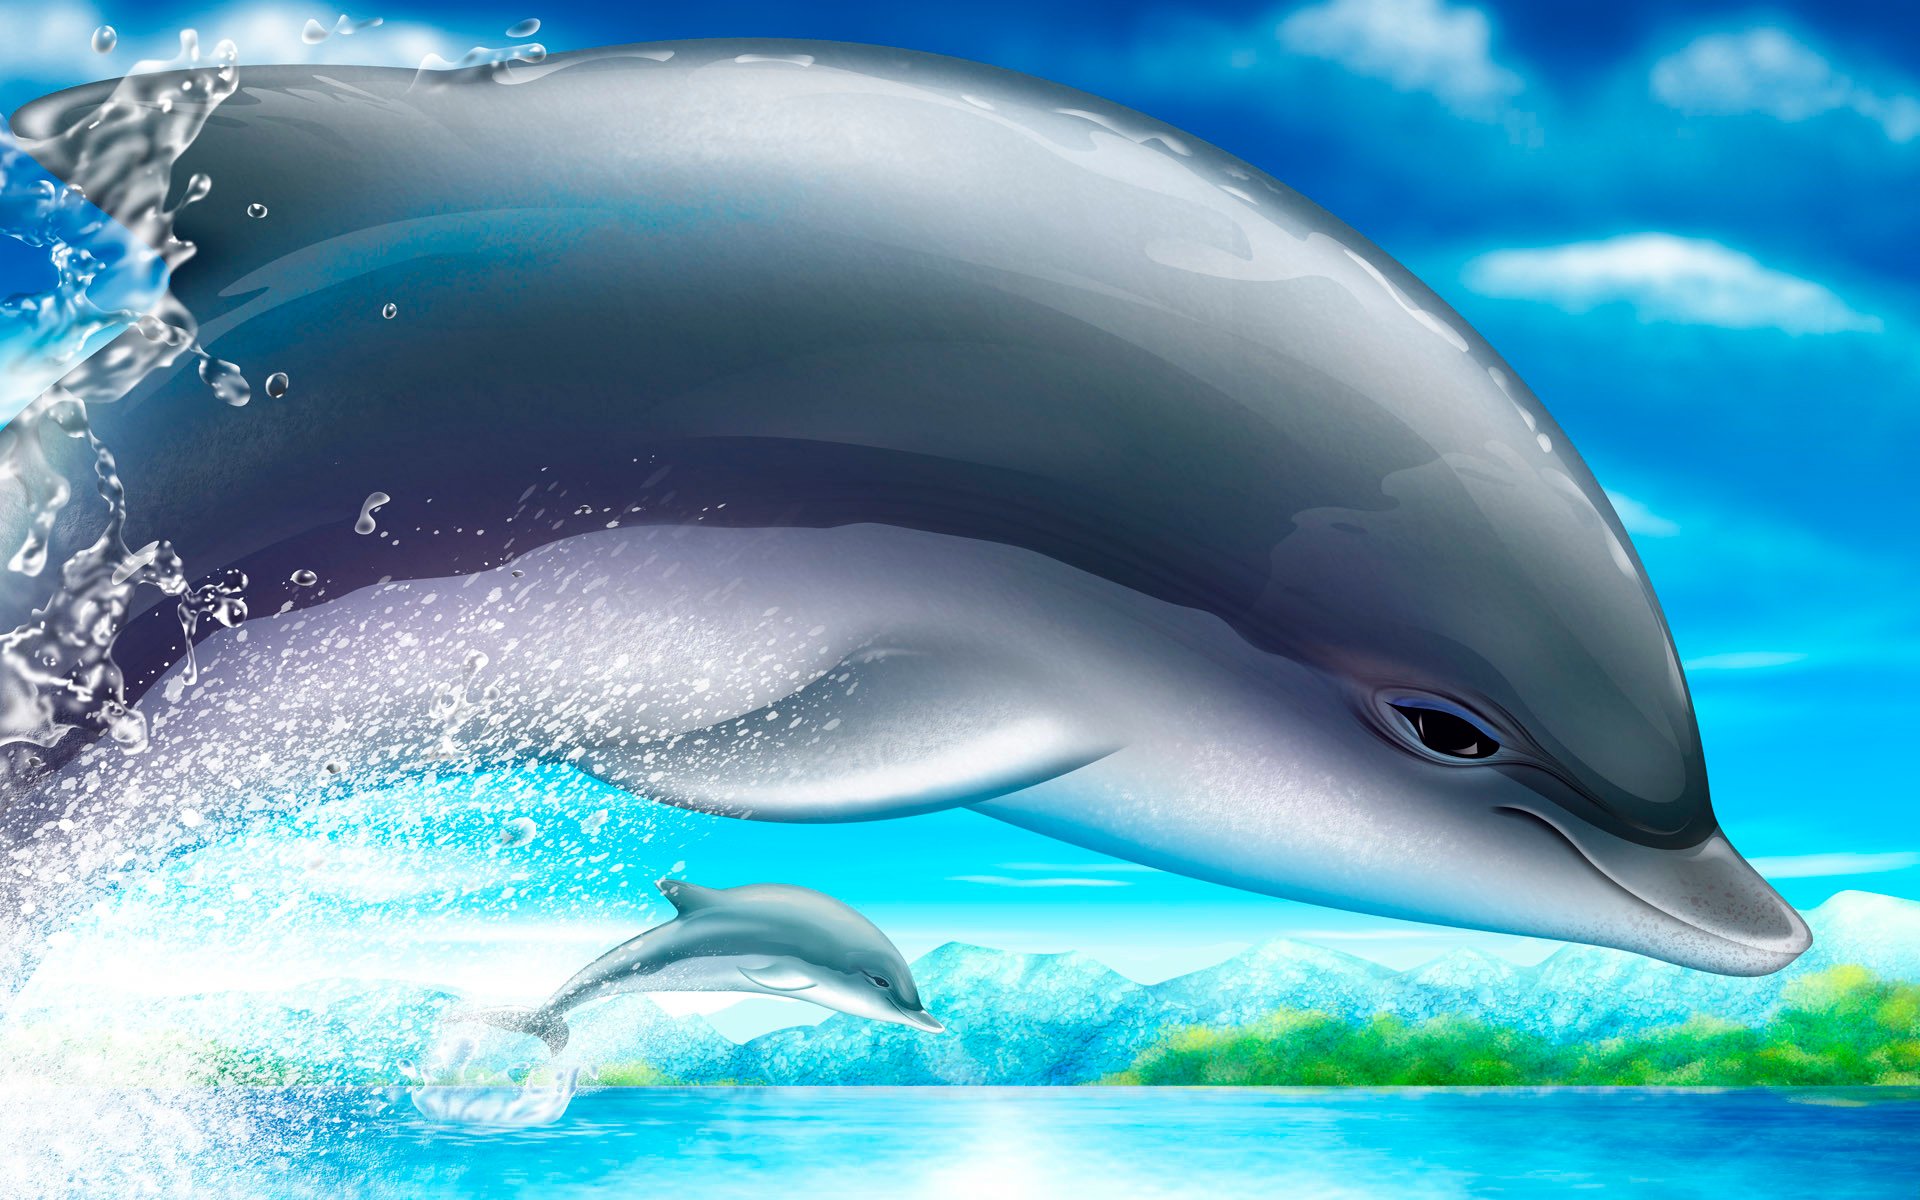 Animated Dolphin Wallpaper, Wallpaper, Animated Dolphin Of Animals With Scenery